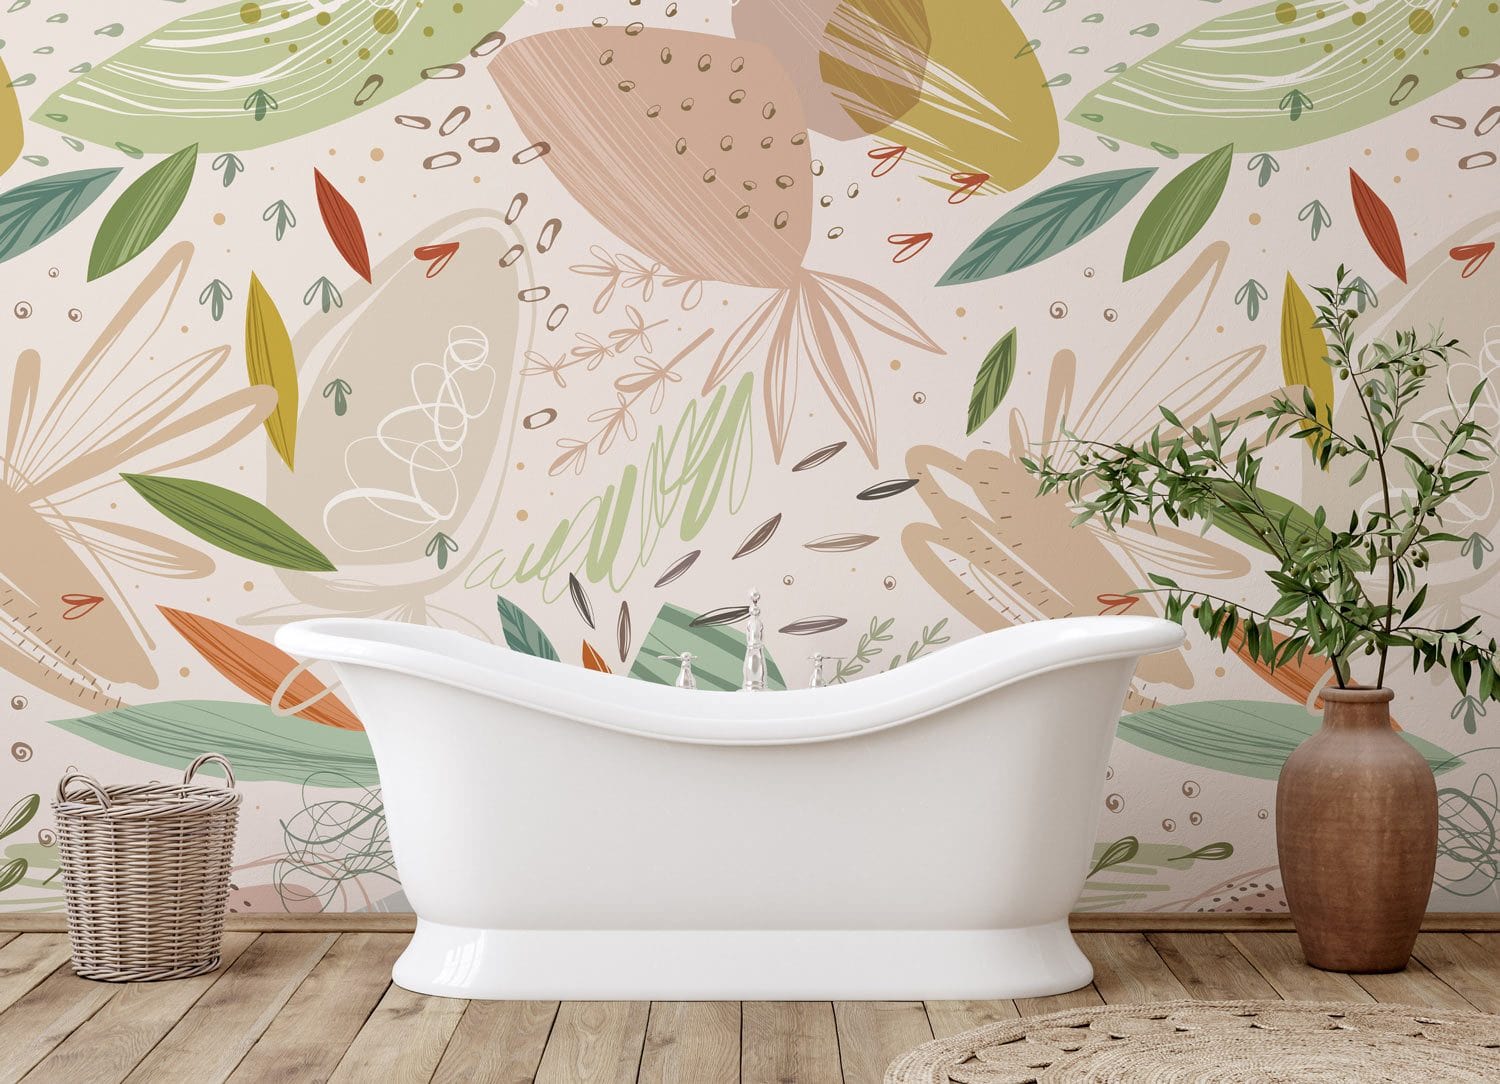 Wallpaper mural with an abstract plant pattern, perfect for decorating a bathroom.